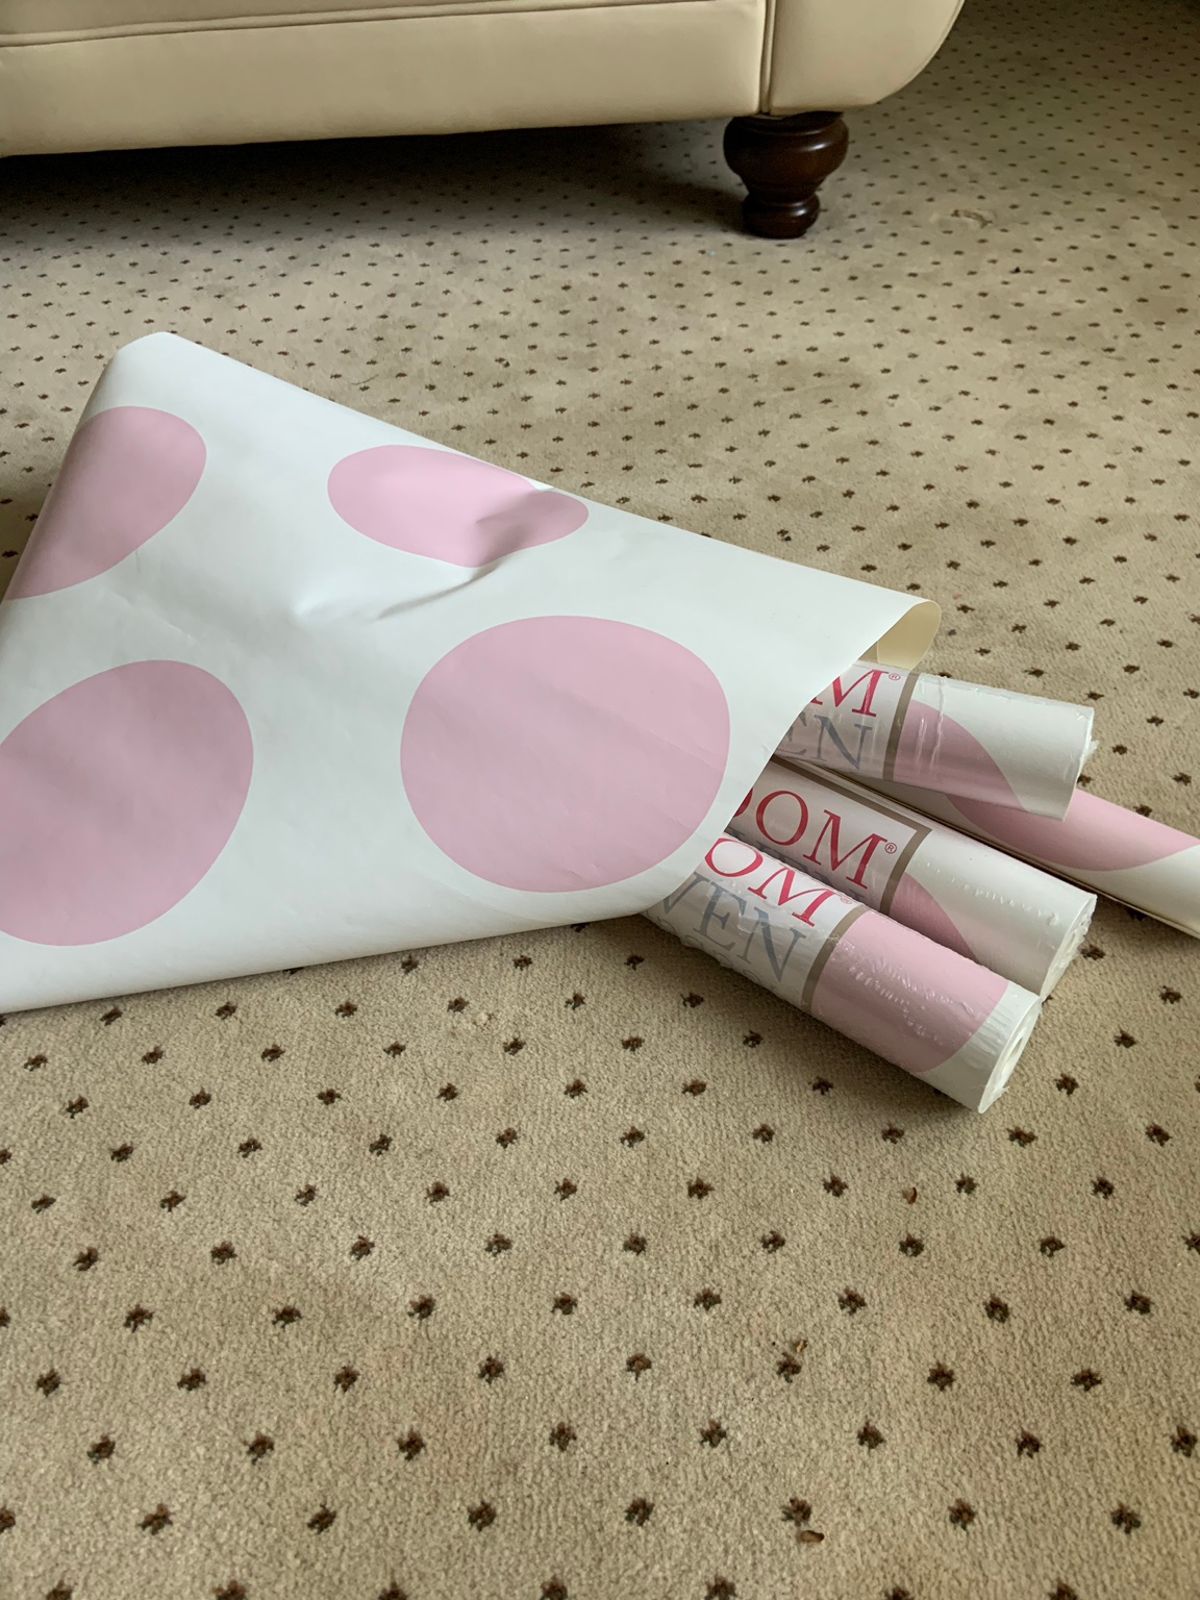 3 Unopened Rolls And 1/4 Of Another Roll - Polka Dot - HD Wallpaper 